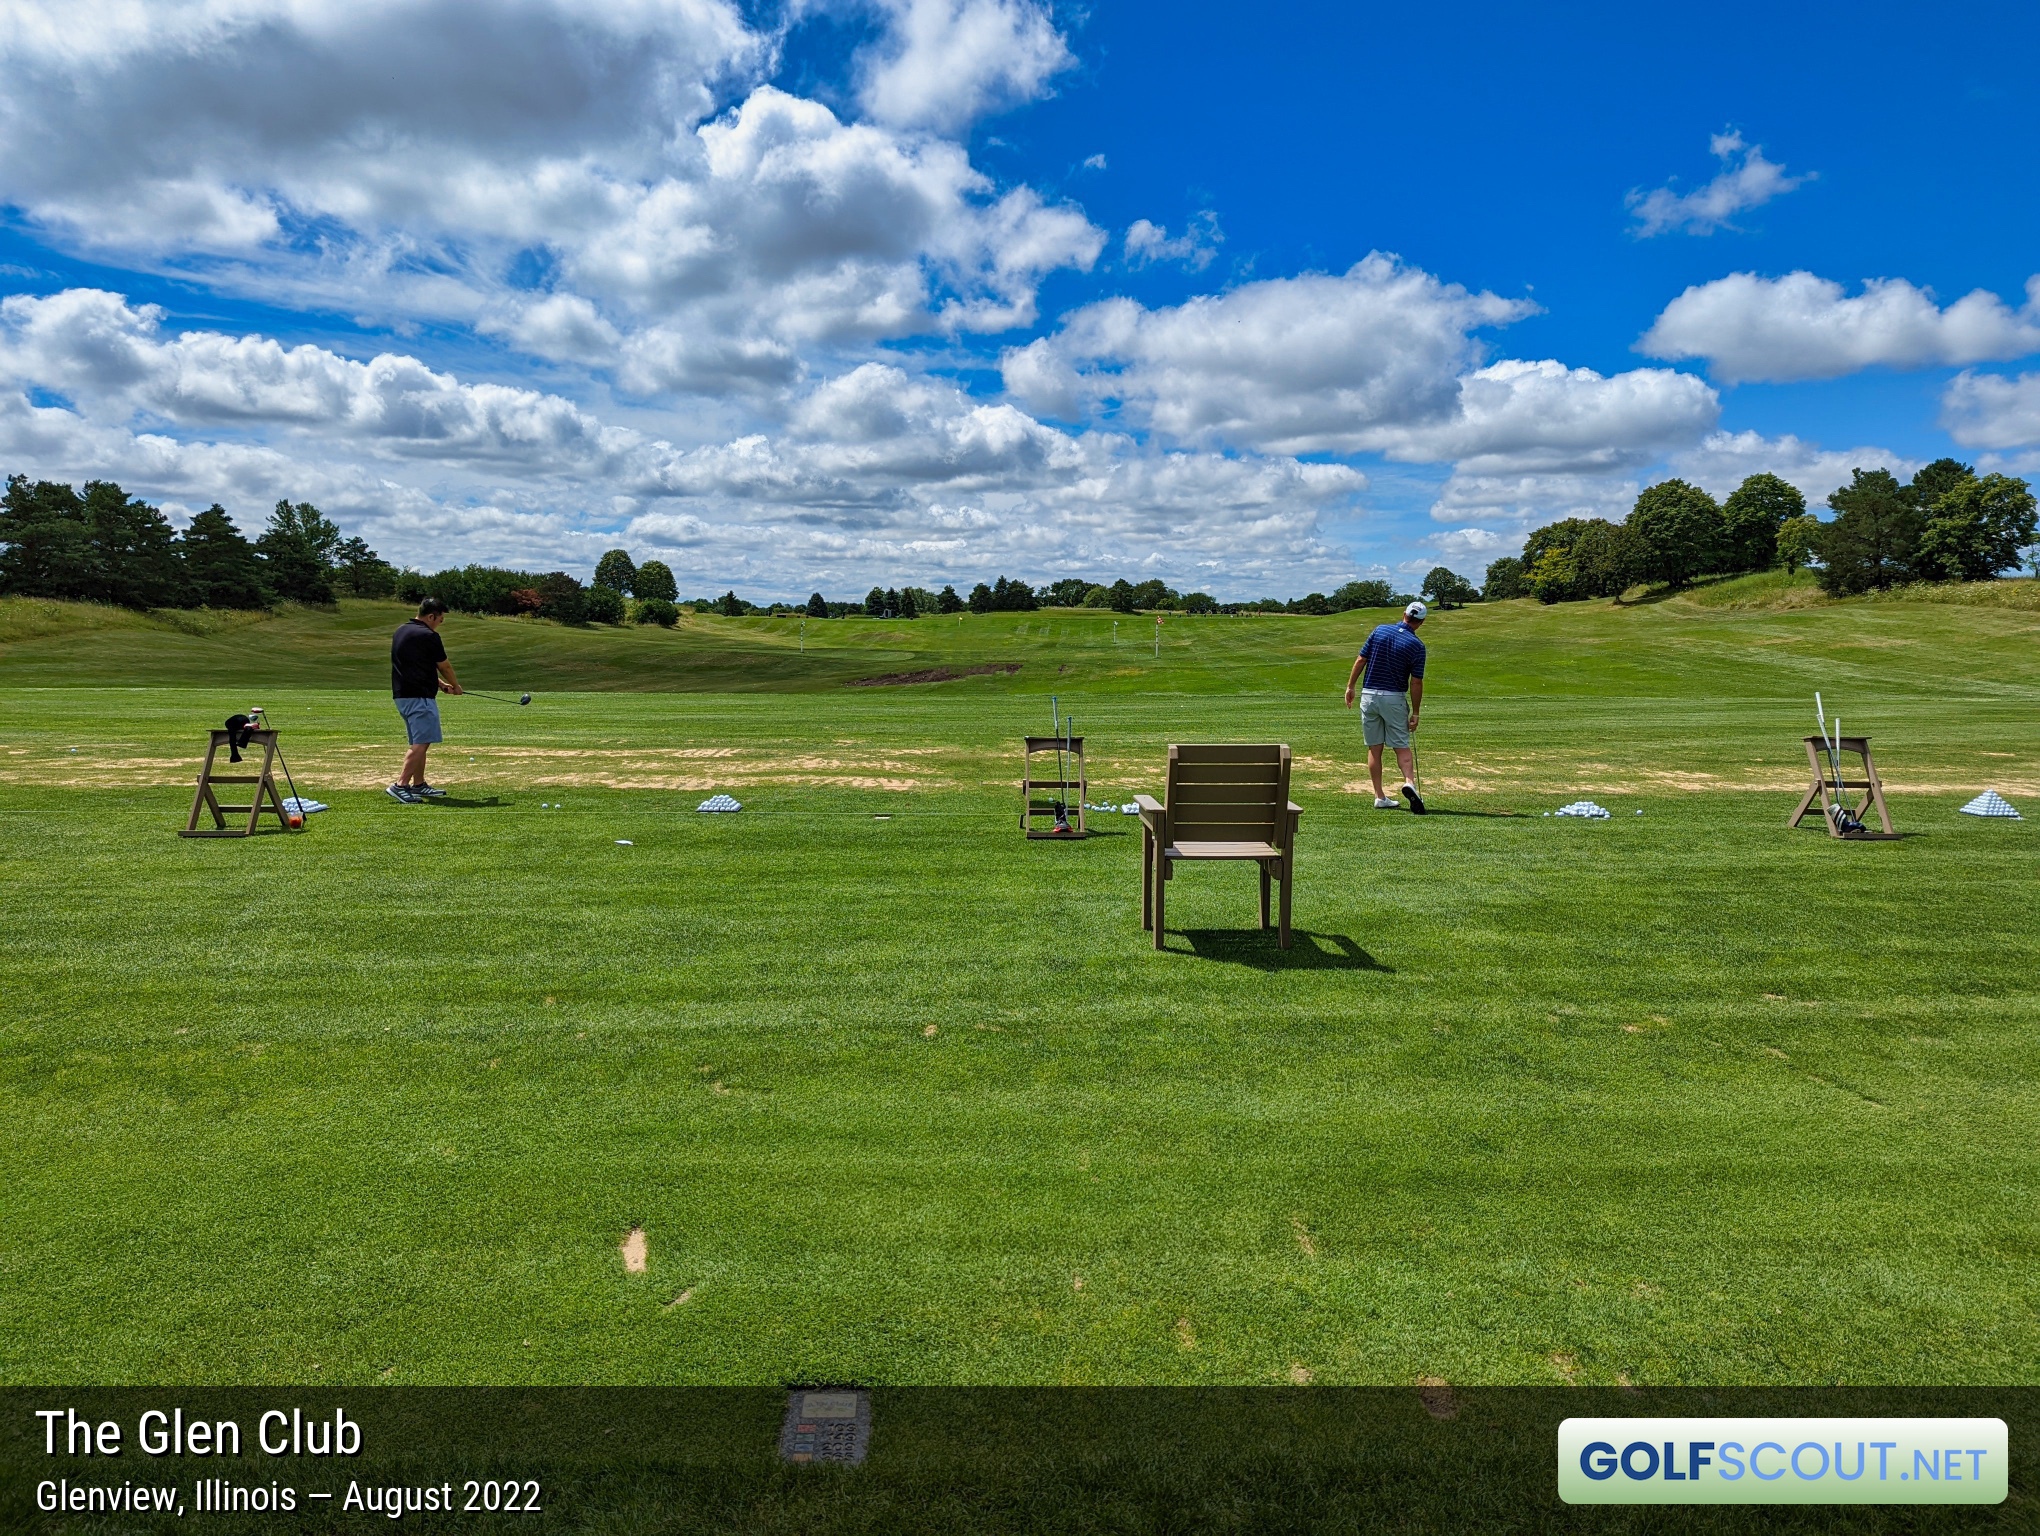 Photo of the practice area at The Glen Club in Glenview, Illinois. 